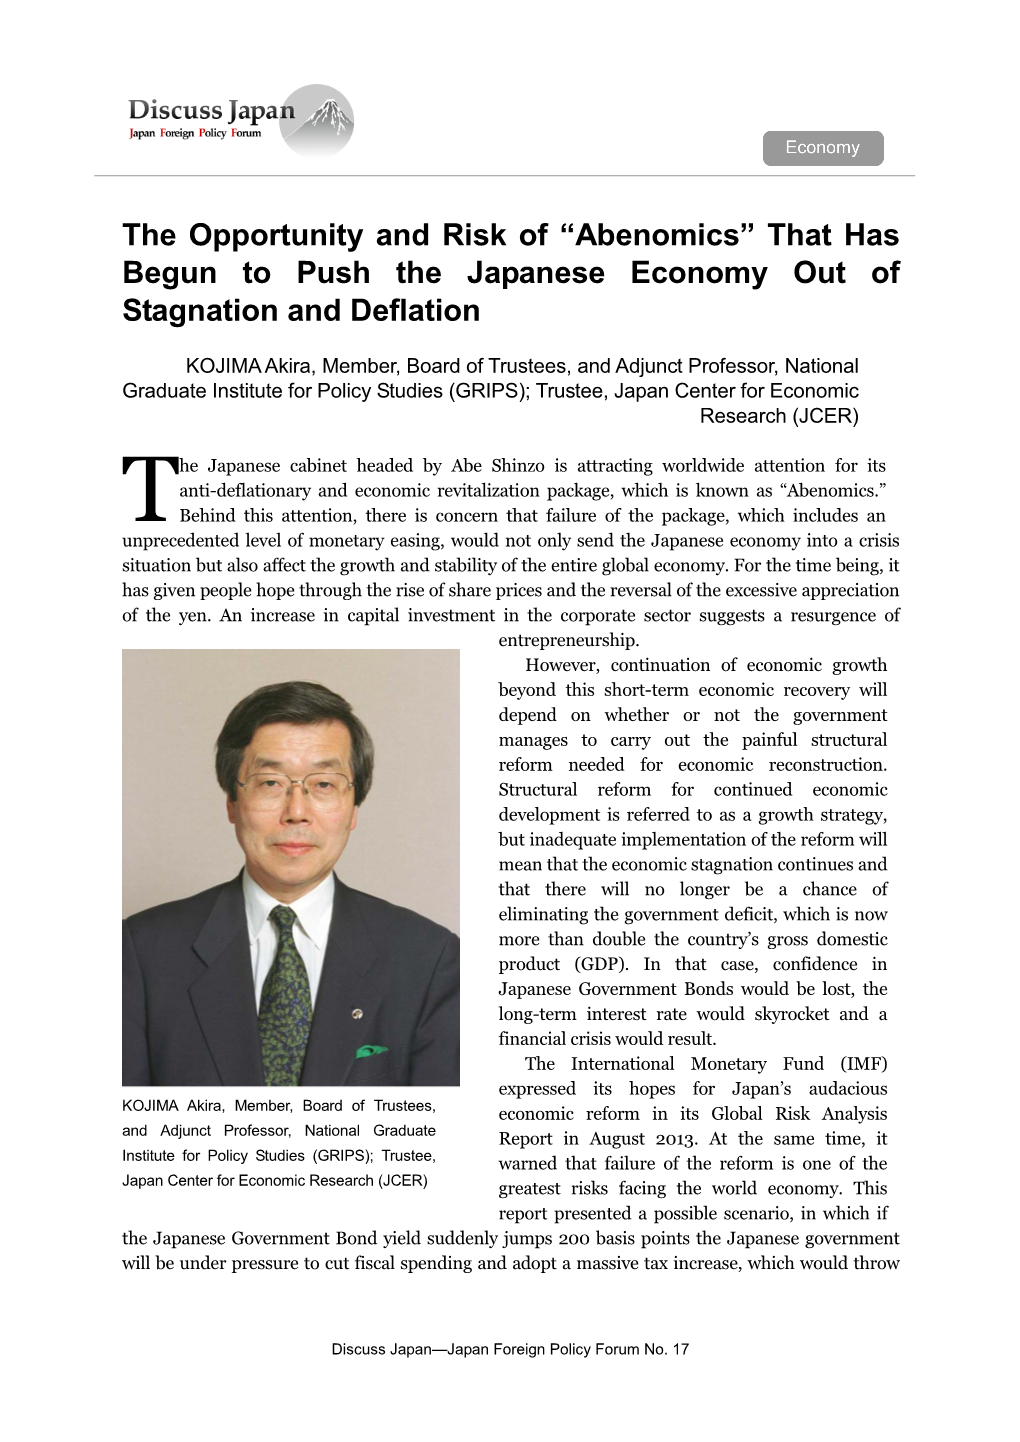 Abenomics” That Has Begun to Push the Japanese Economy out of Stagnation and Deflation